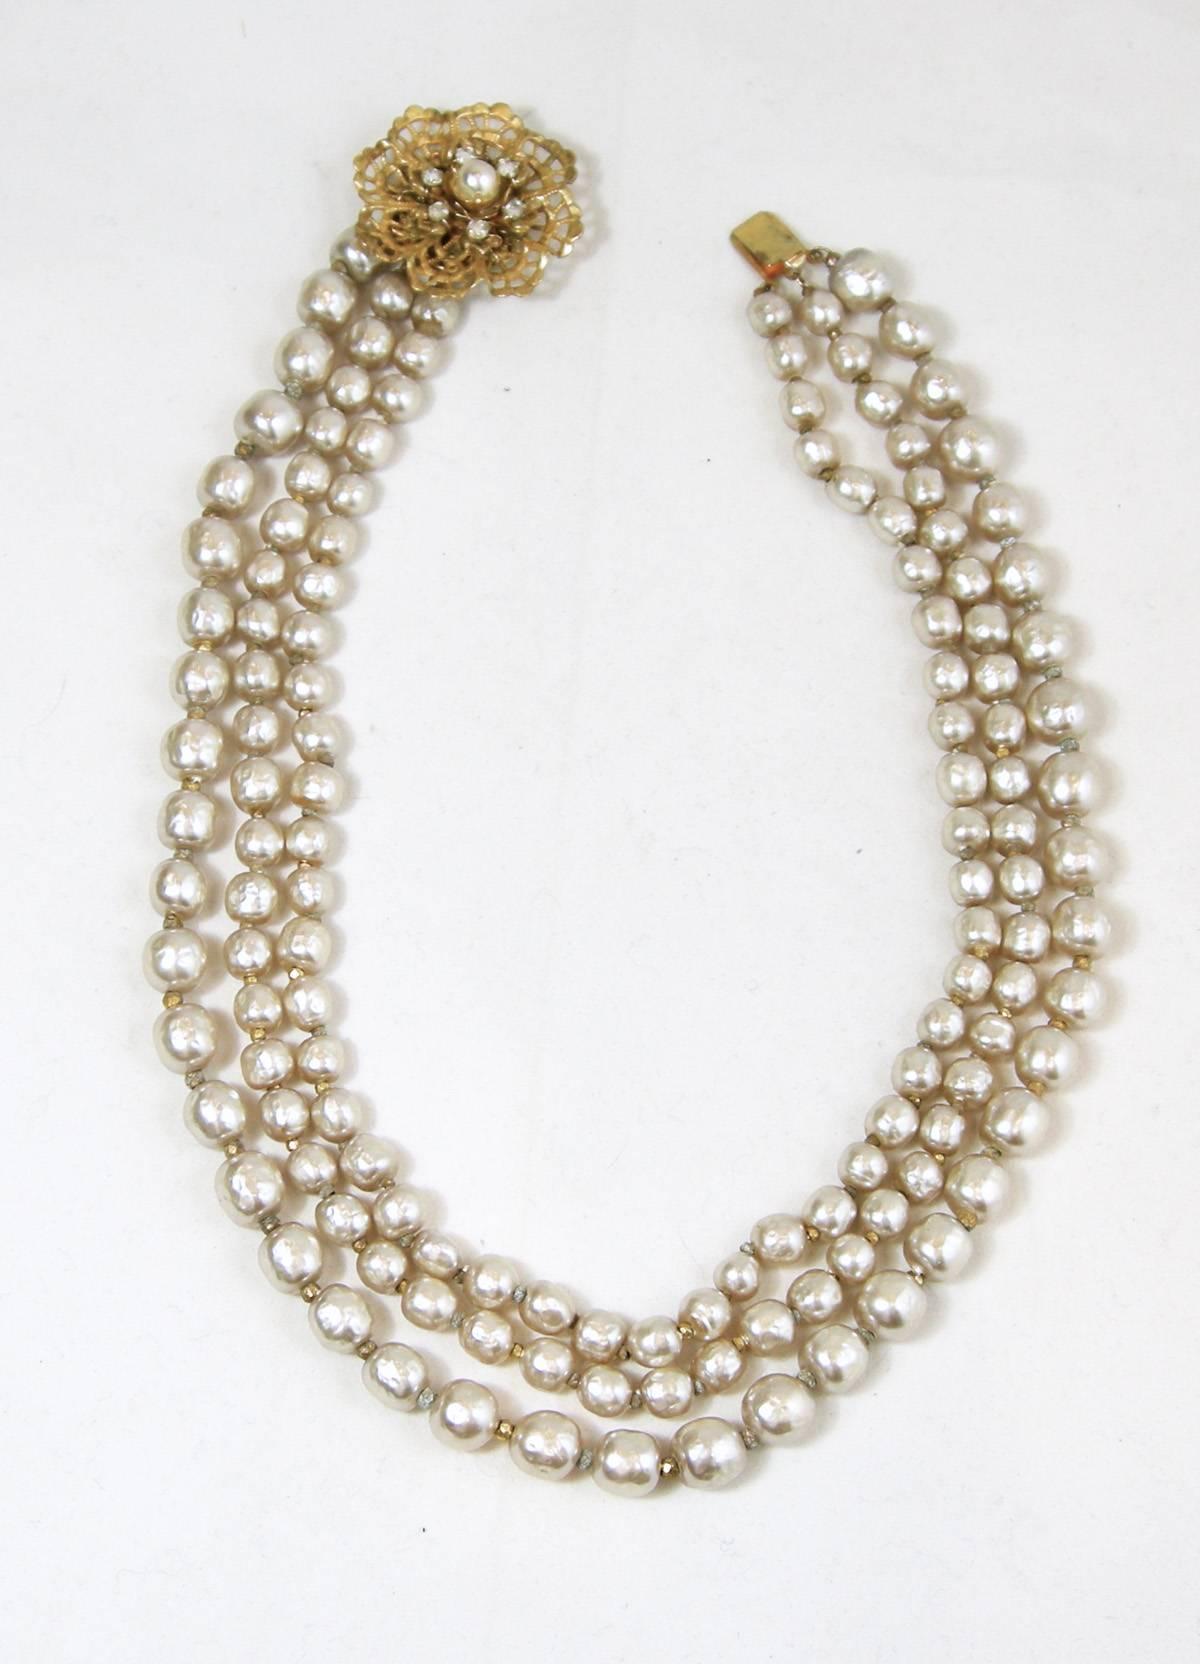 This vintage Miriam Haskell necklace has a slide in clasp with an open gold tone floral design with small rhinestone around a faux pearl center.  There are 2 strands of small faux baroque pearls with gold tone space between each pearl and the third